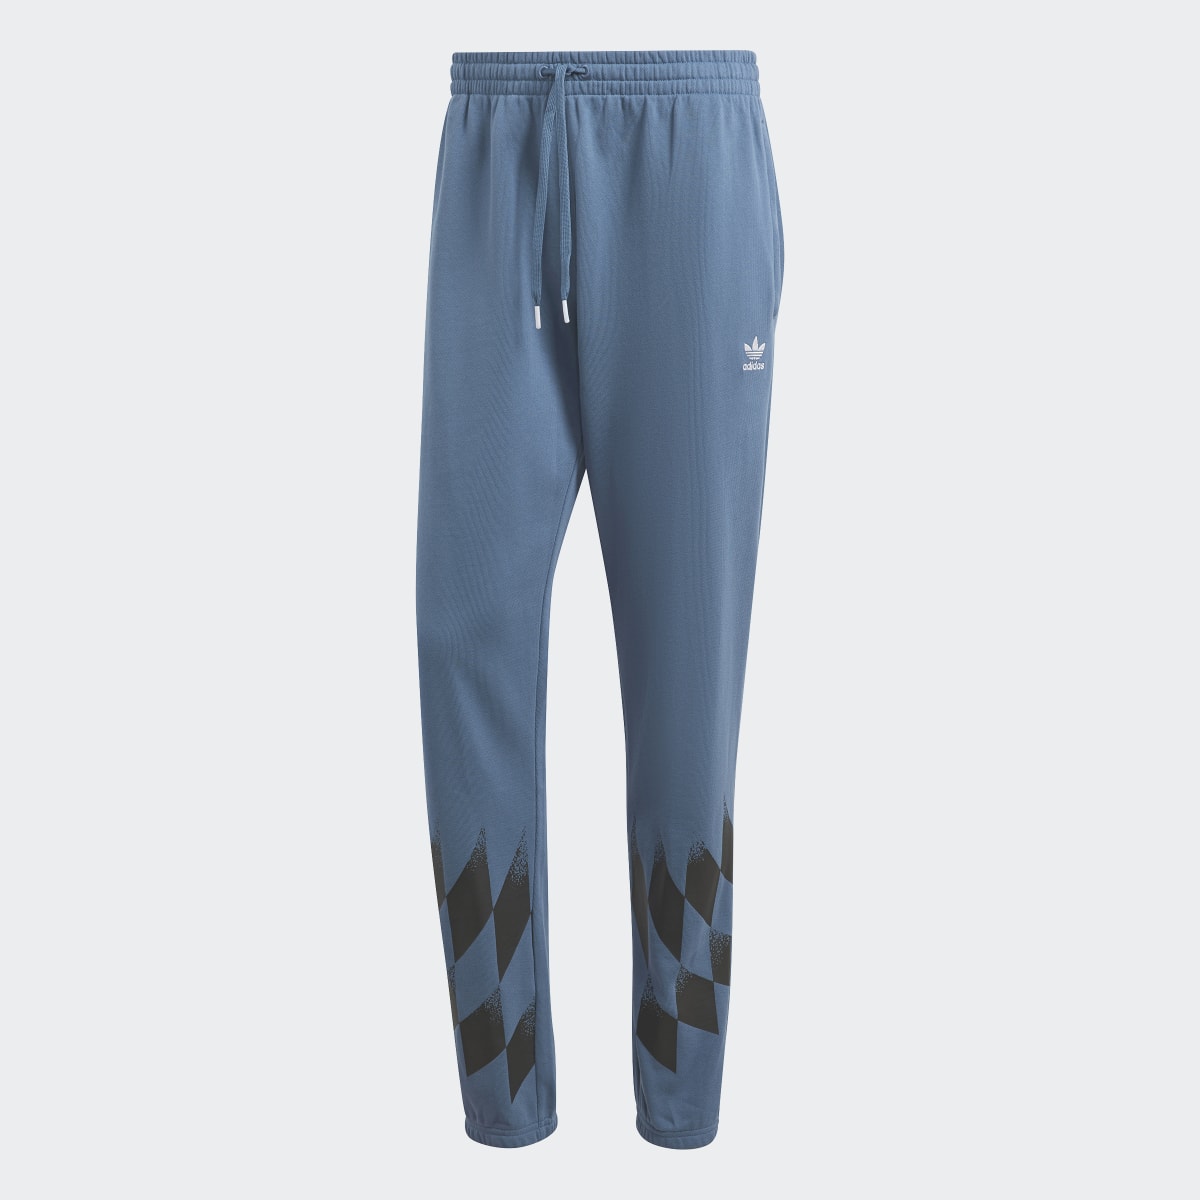 Adidas Rekive Placed Graphic Sweat Pants. 5